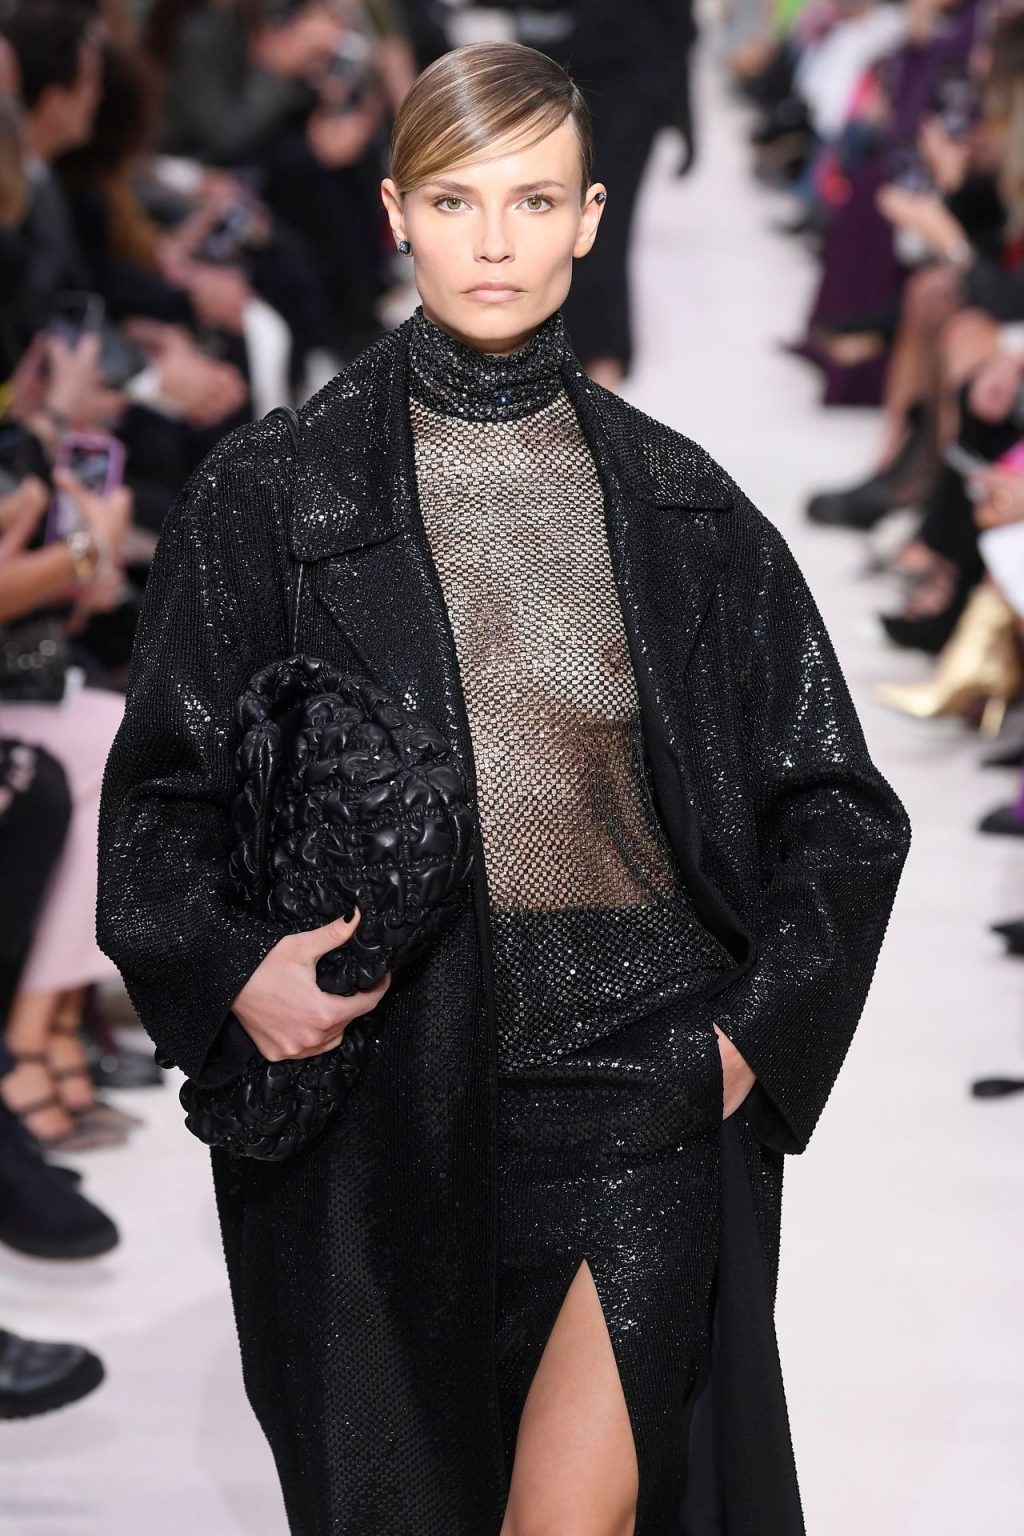 Natasha Poly Walks in a See Through Top on the Runway for the Valentino Show (8 Photos + GIF)